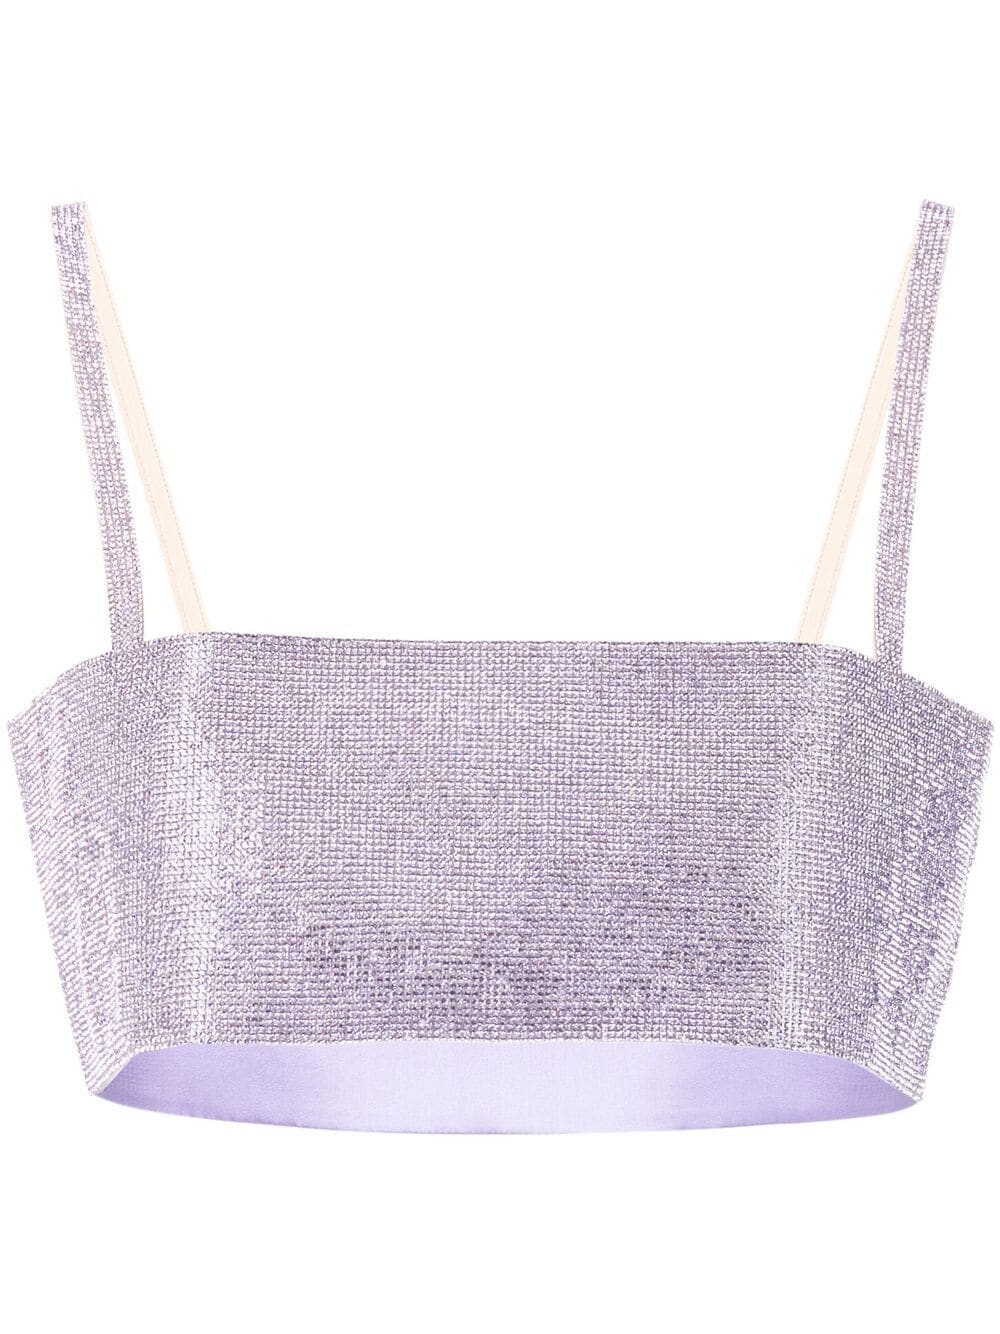 Nuè Charlotte crystal-embellished Cropped Top - Farfetch